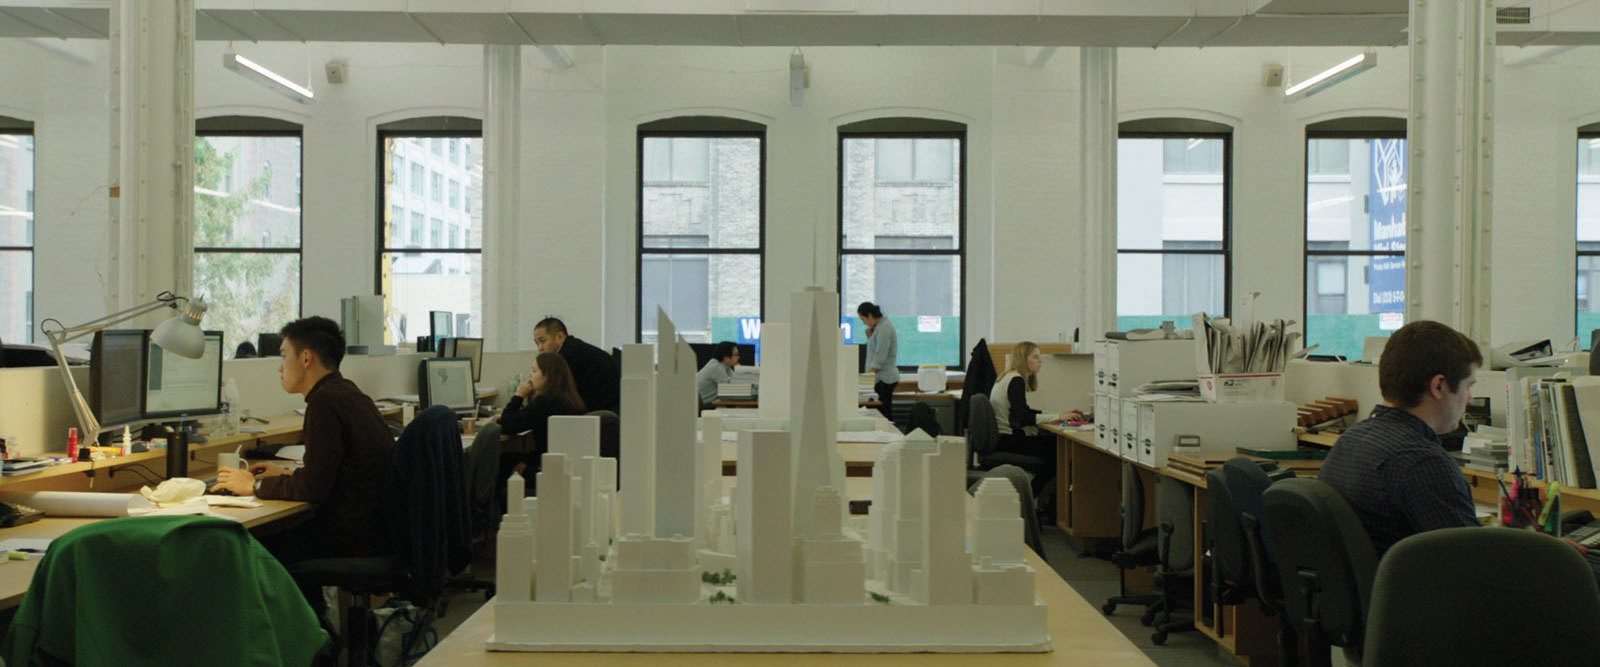 A journey through the architectural offices of New York looking at the production of architecture...